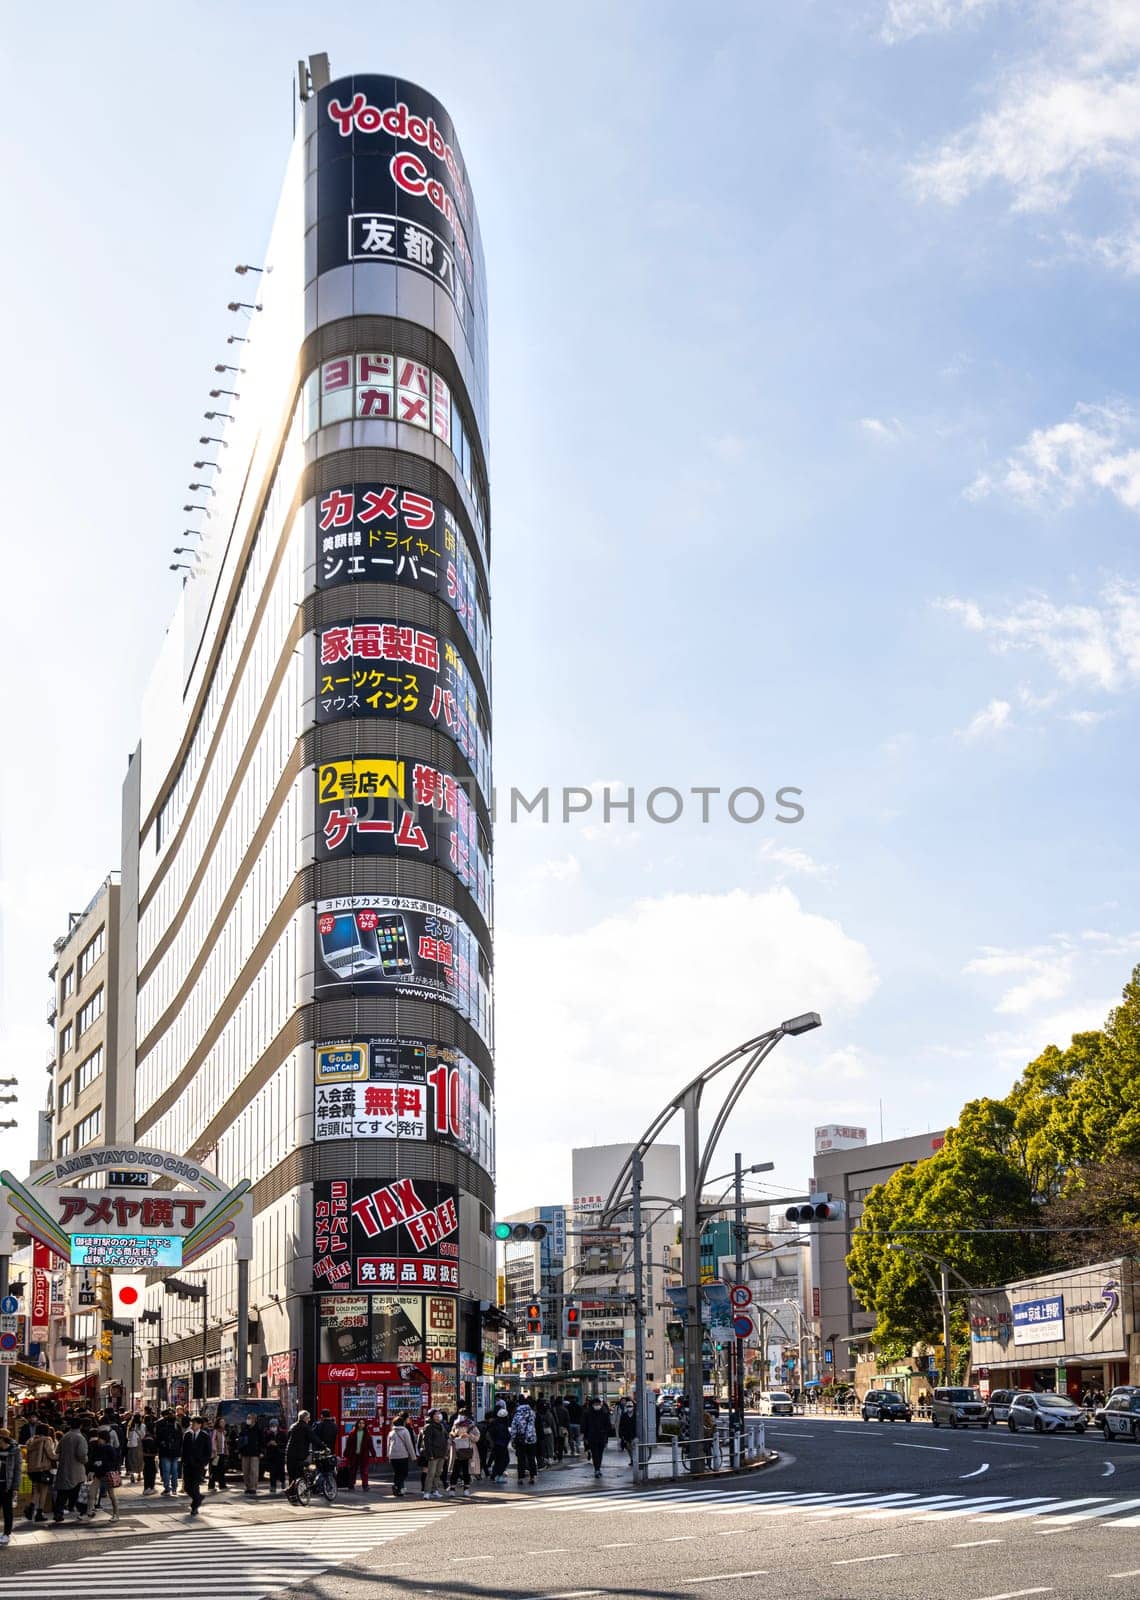 Advertisements on a building in Tokyo, Japan by sergiodv